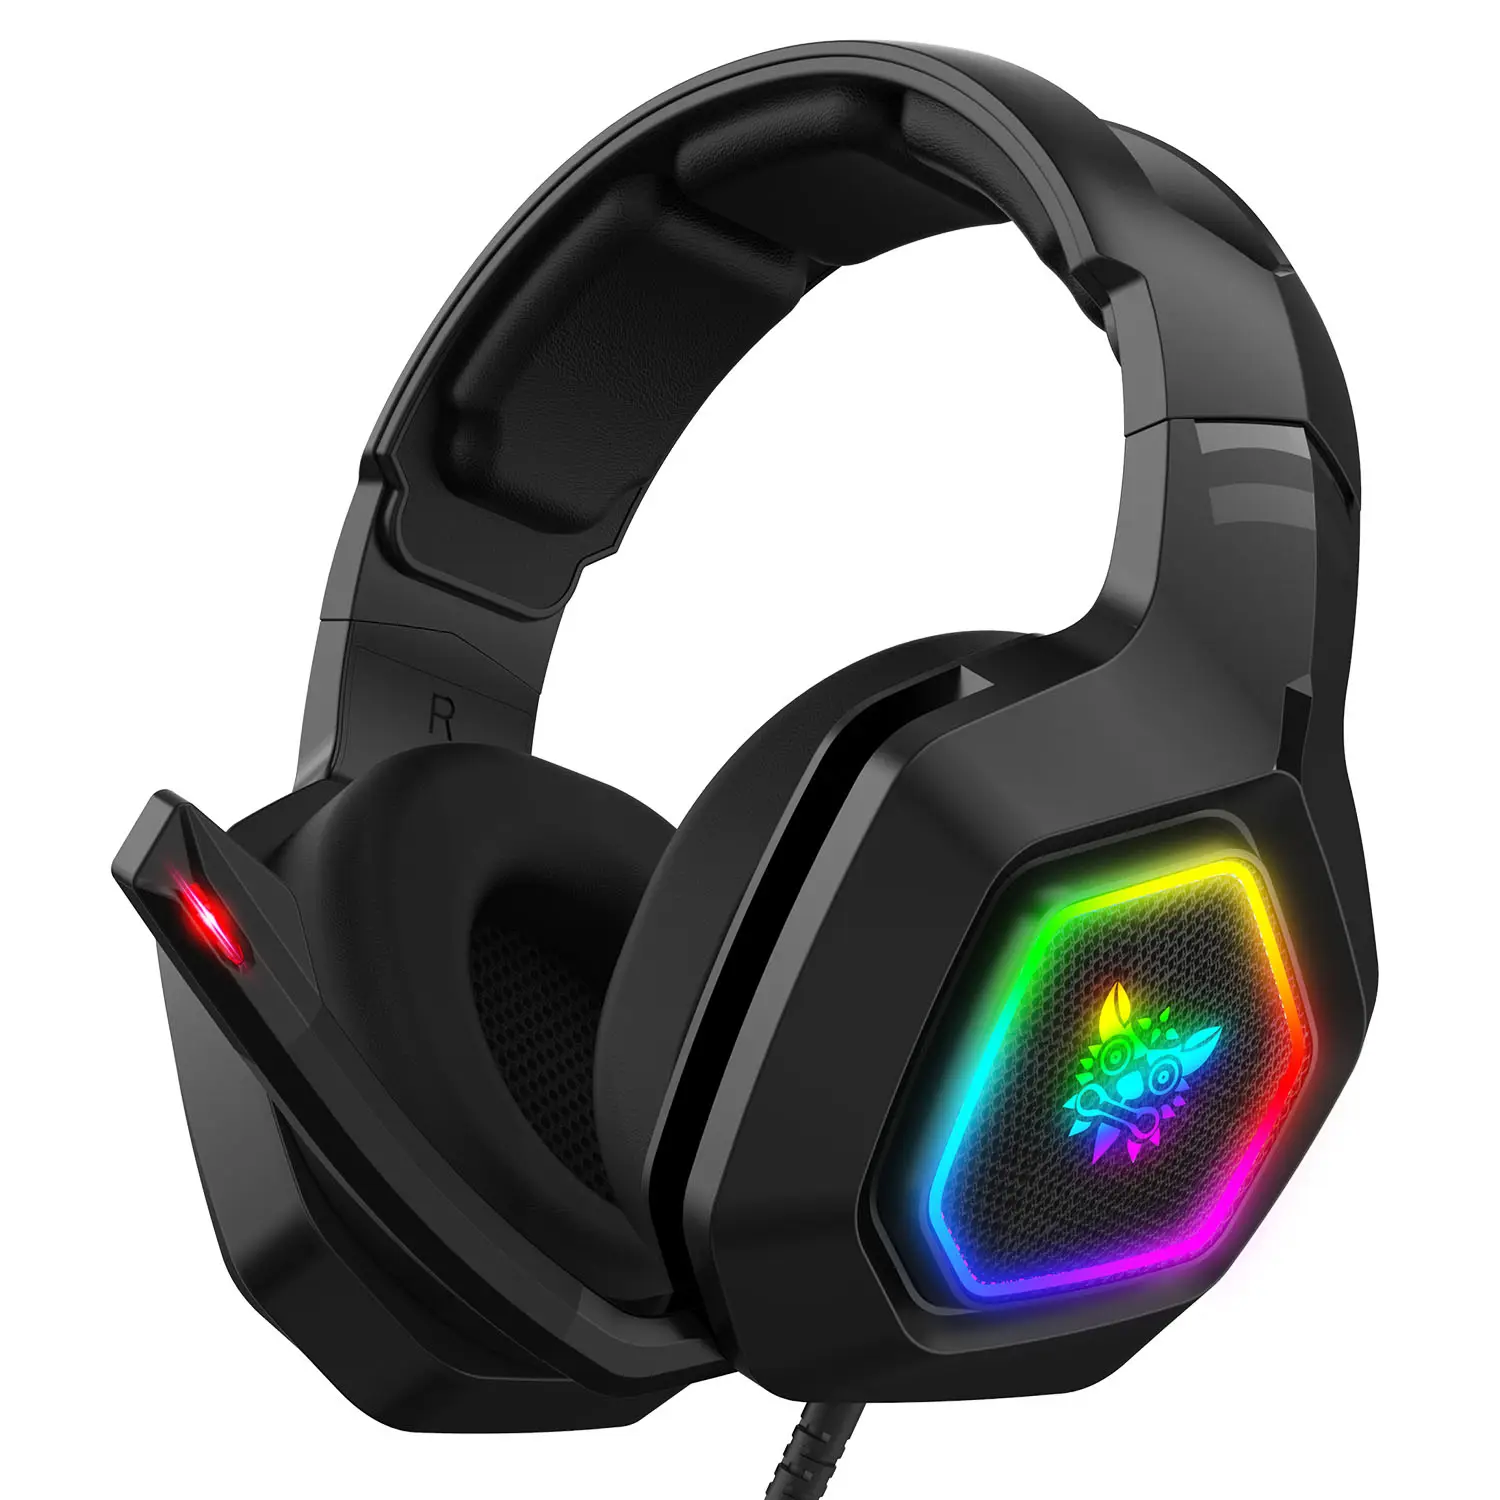 Overseas warehouse Onikuma K10 RGB Gaming Headset with Noise Reduction Mic PC Computer PS4 PS5 Gaming Headphone 3.5MM Headphone